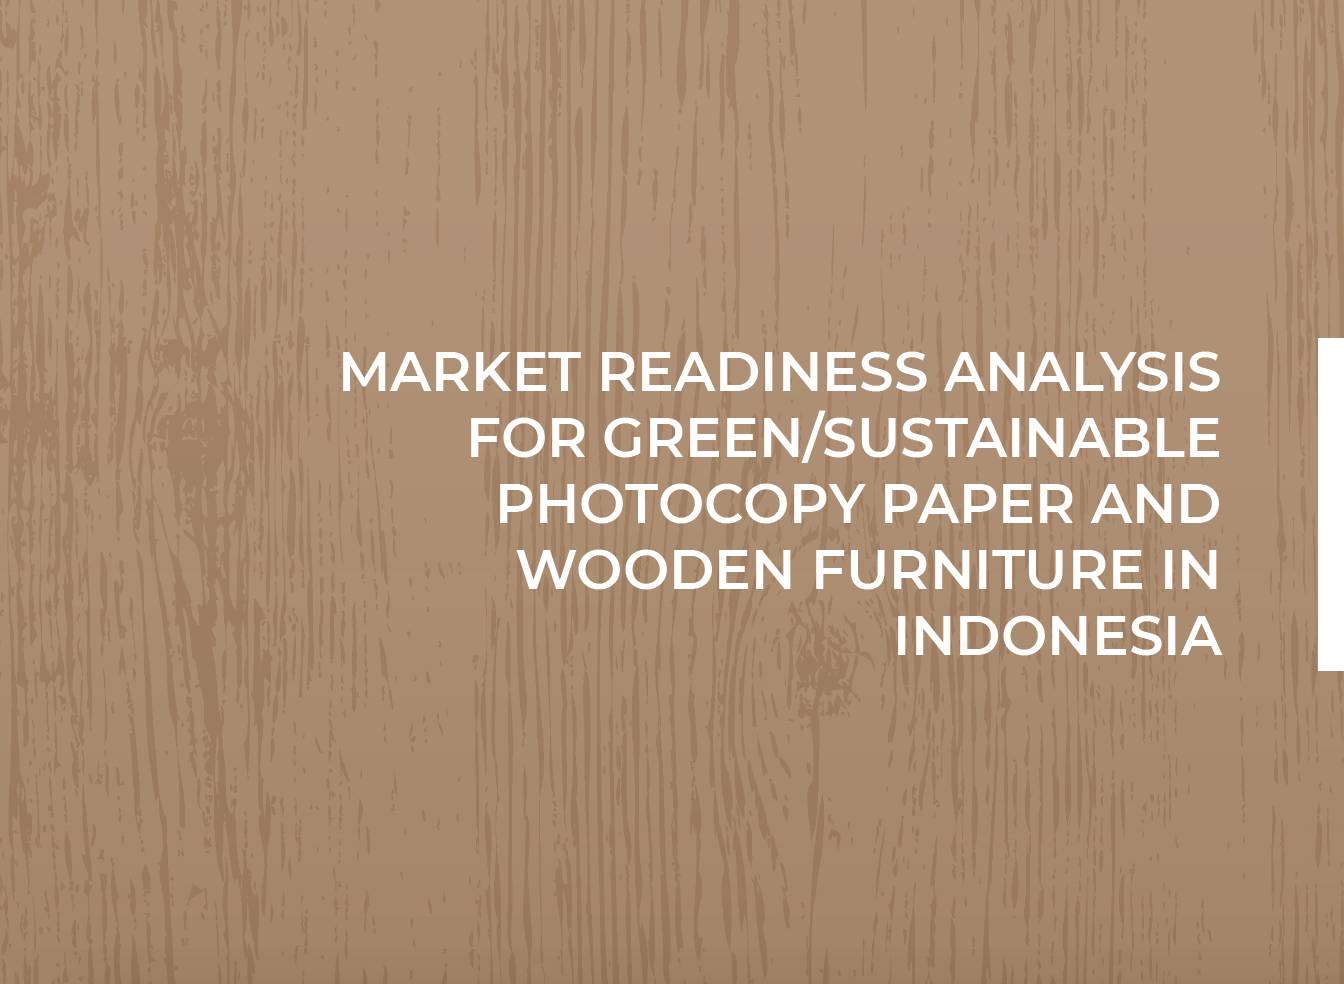 Market Readiness Analysis for Green/ Sustainable Photocopy Paper and Wooden Furniture in Indonesia2941